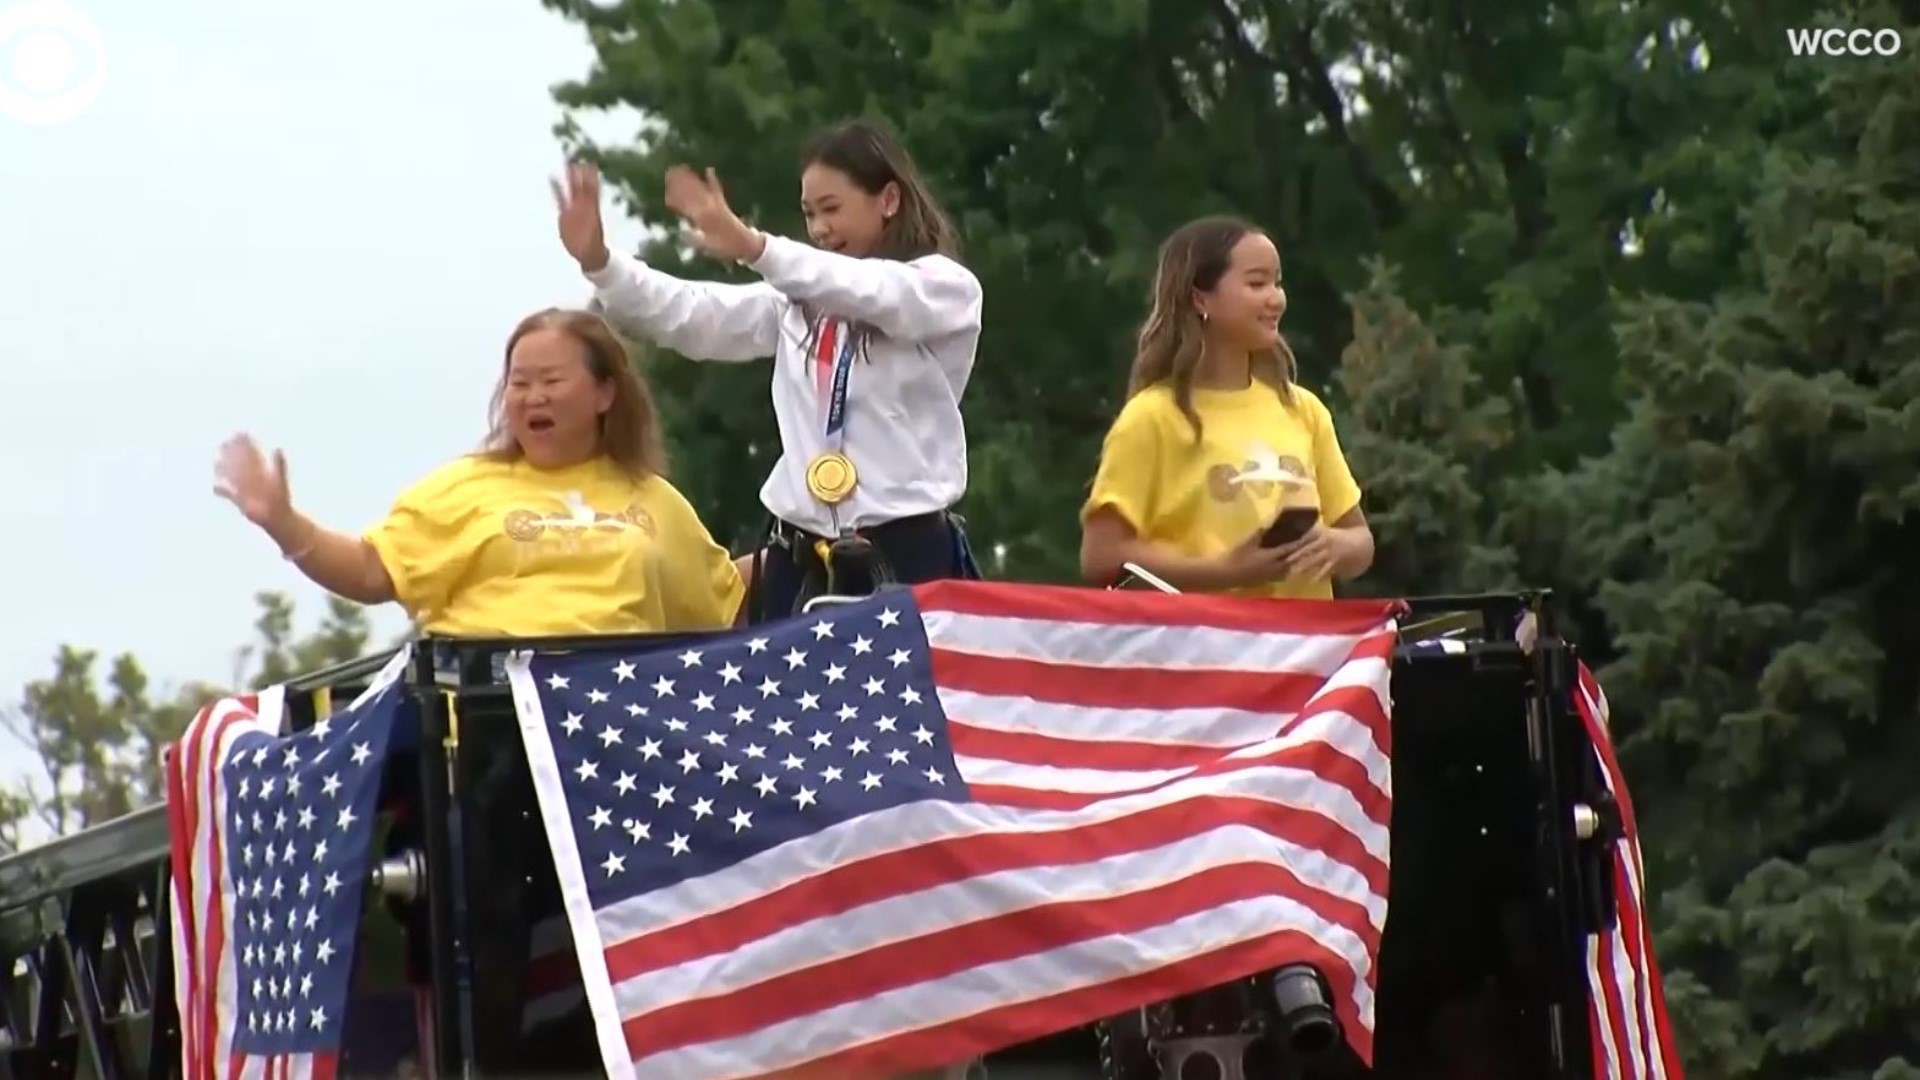 Olympic gold medalist Suni Lee got a hero's welcome when she returned home to St. Paul, MN. on Sunday.